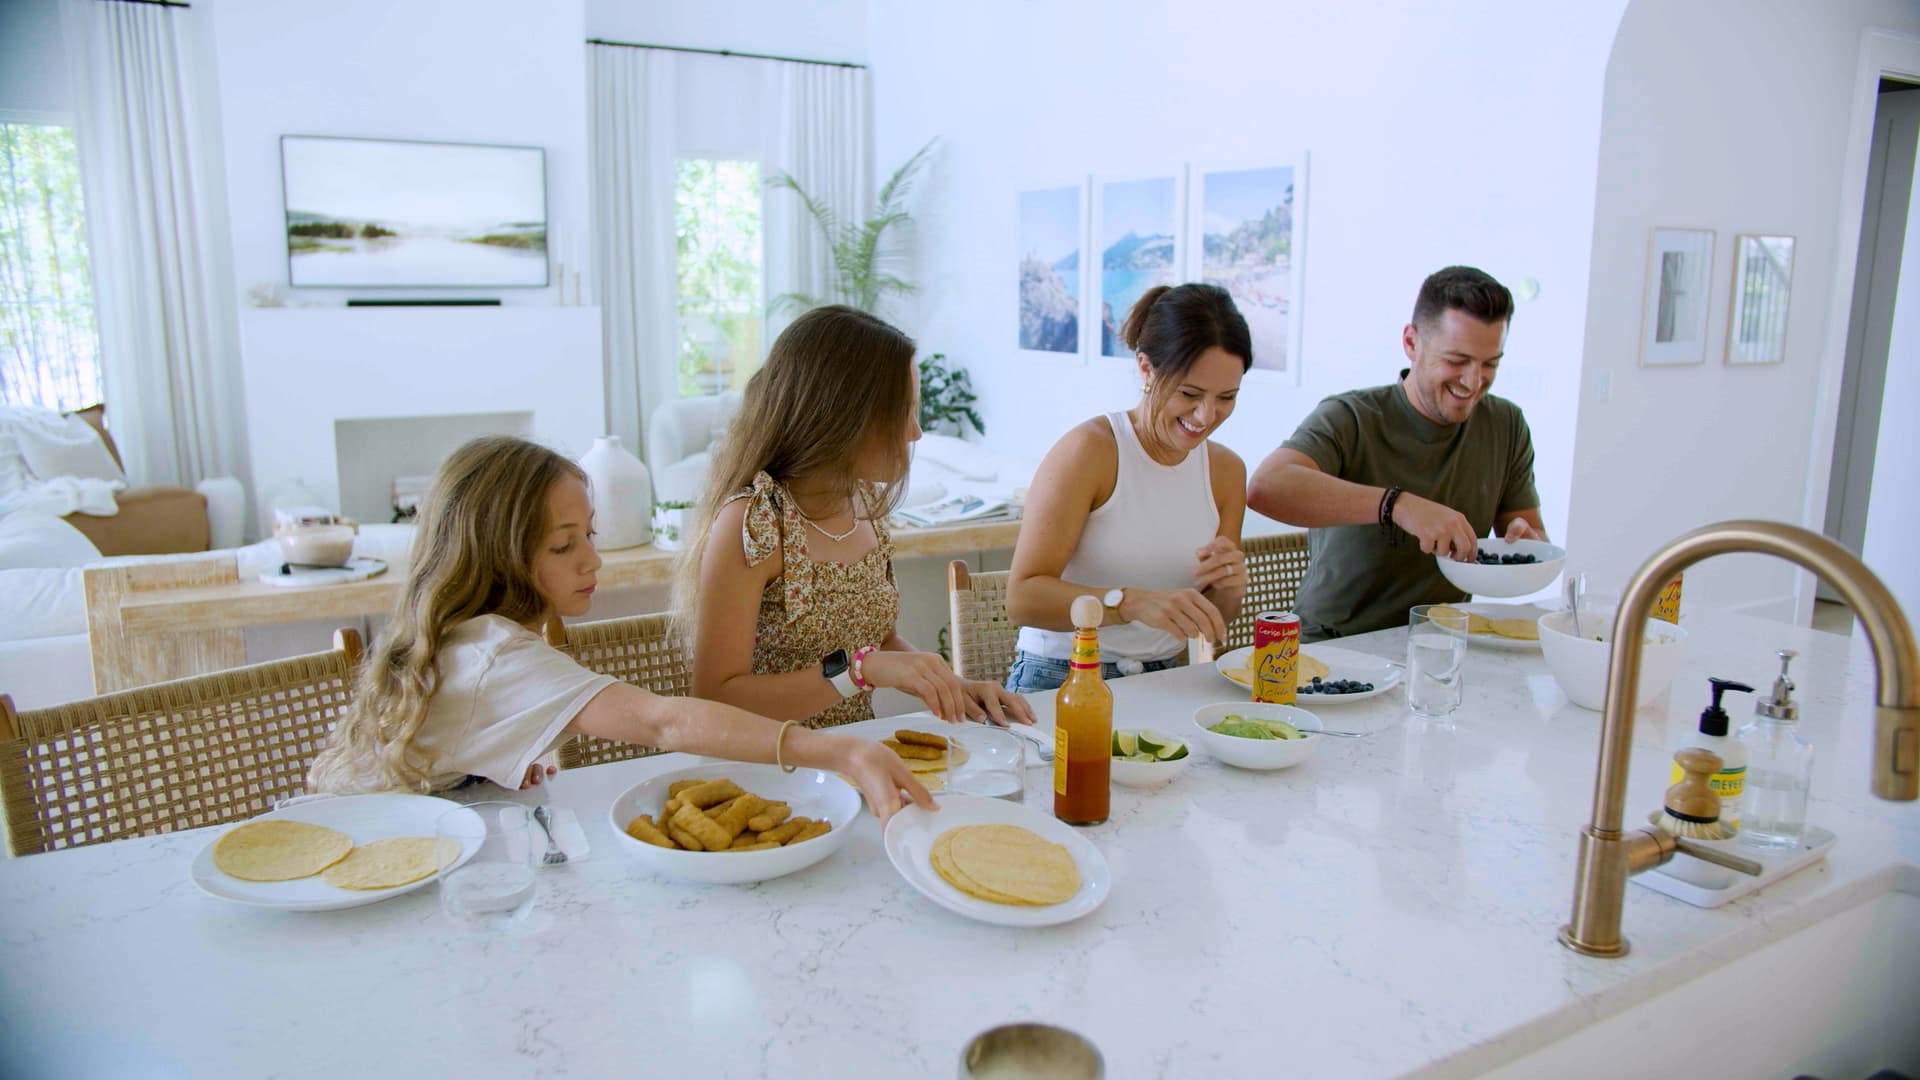 Graham and his wife have breakfast with their kids in the morning before talking through their schedule.